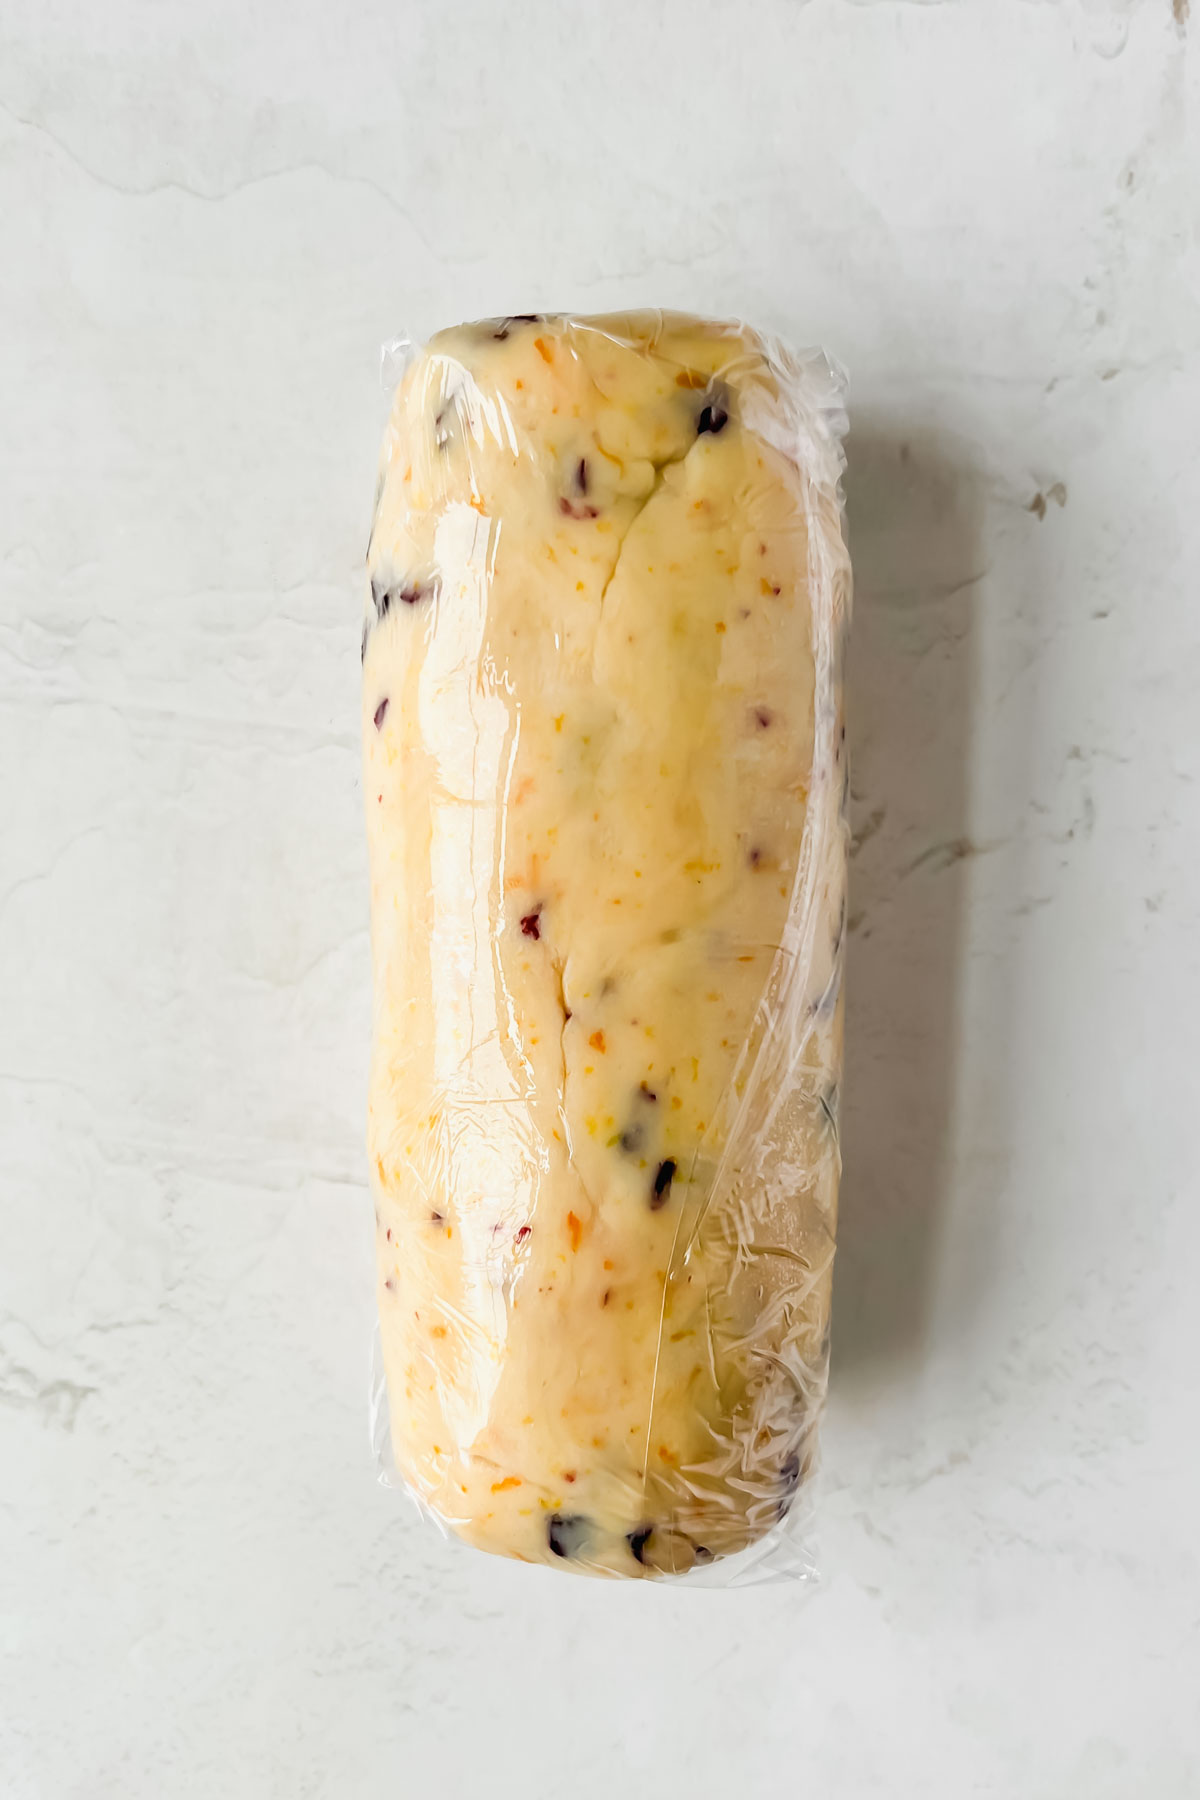 cranberry orange shortbread cookie dough rolled into log wrapped with clear plastic wrap.